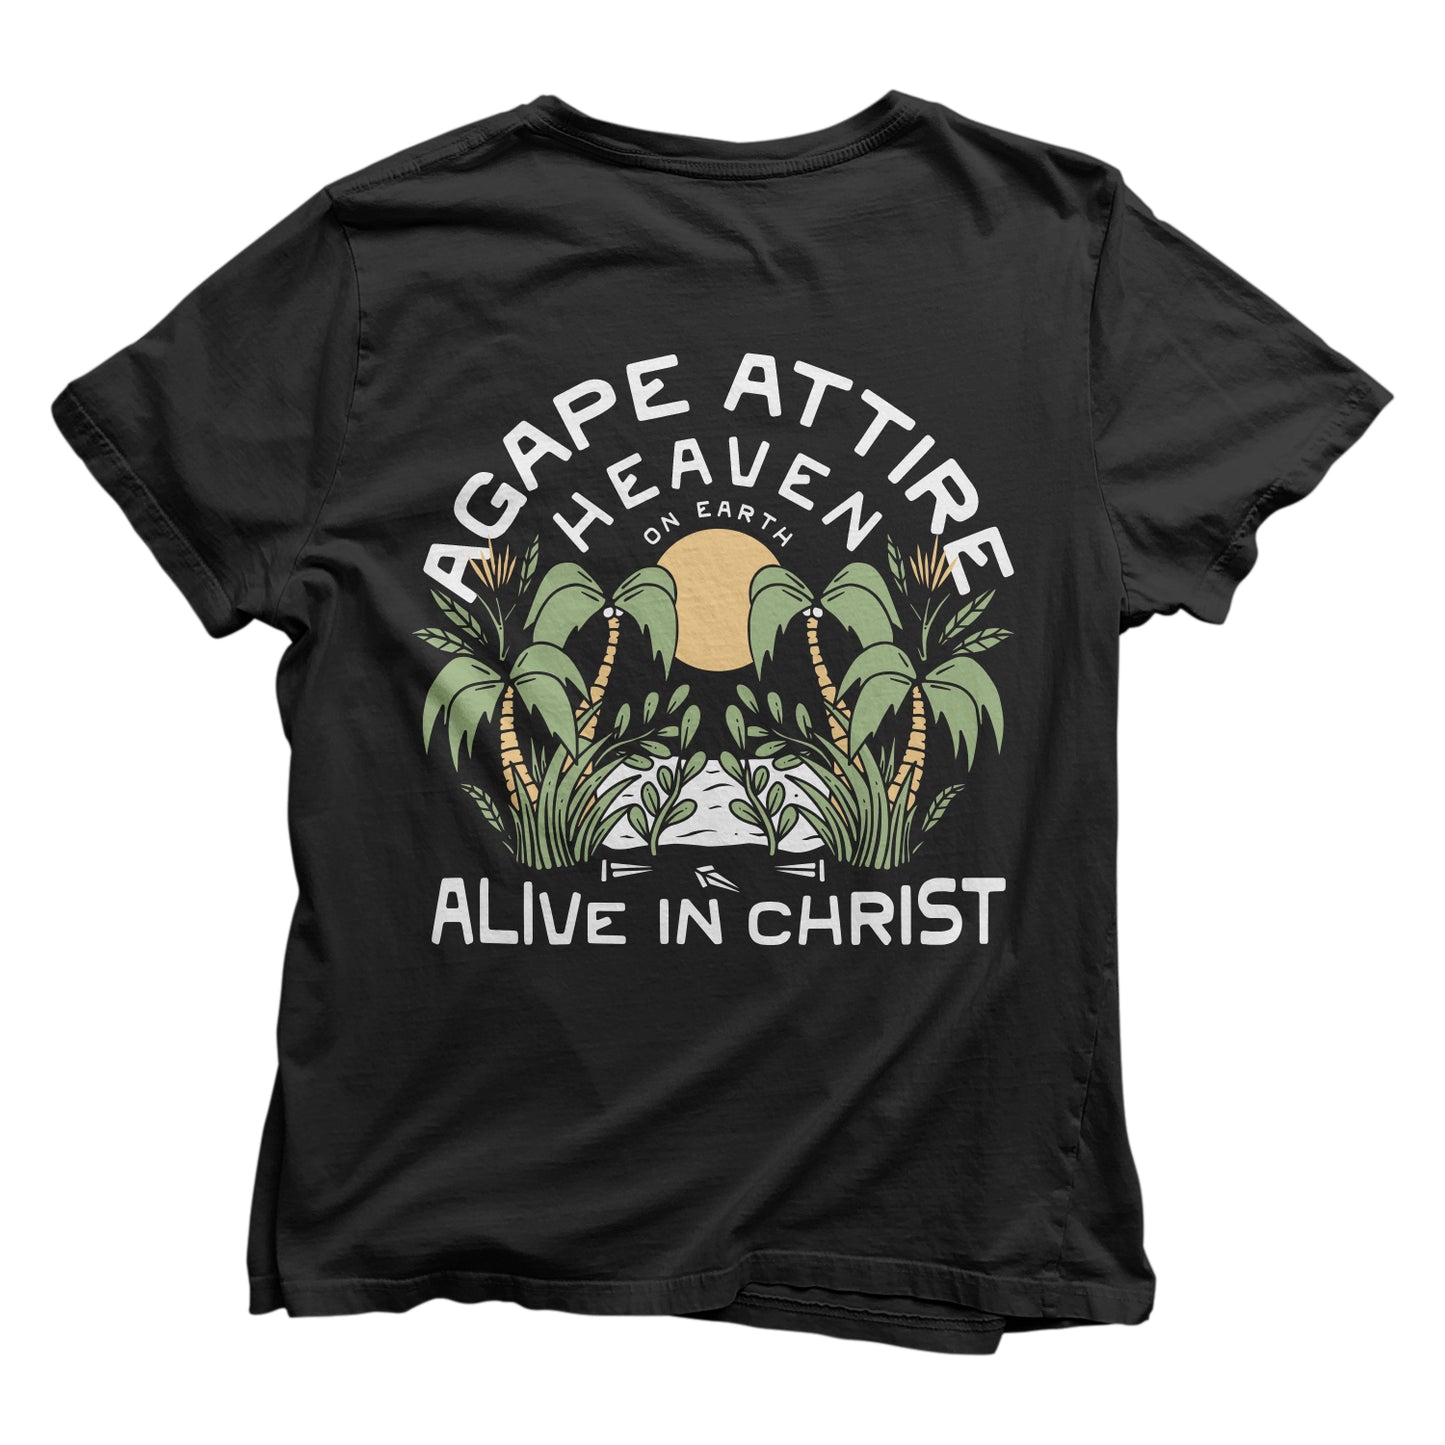 Heaven On Earth (Alive In Christ) Long Tee